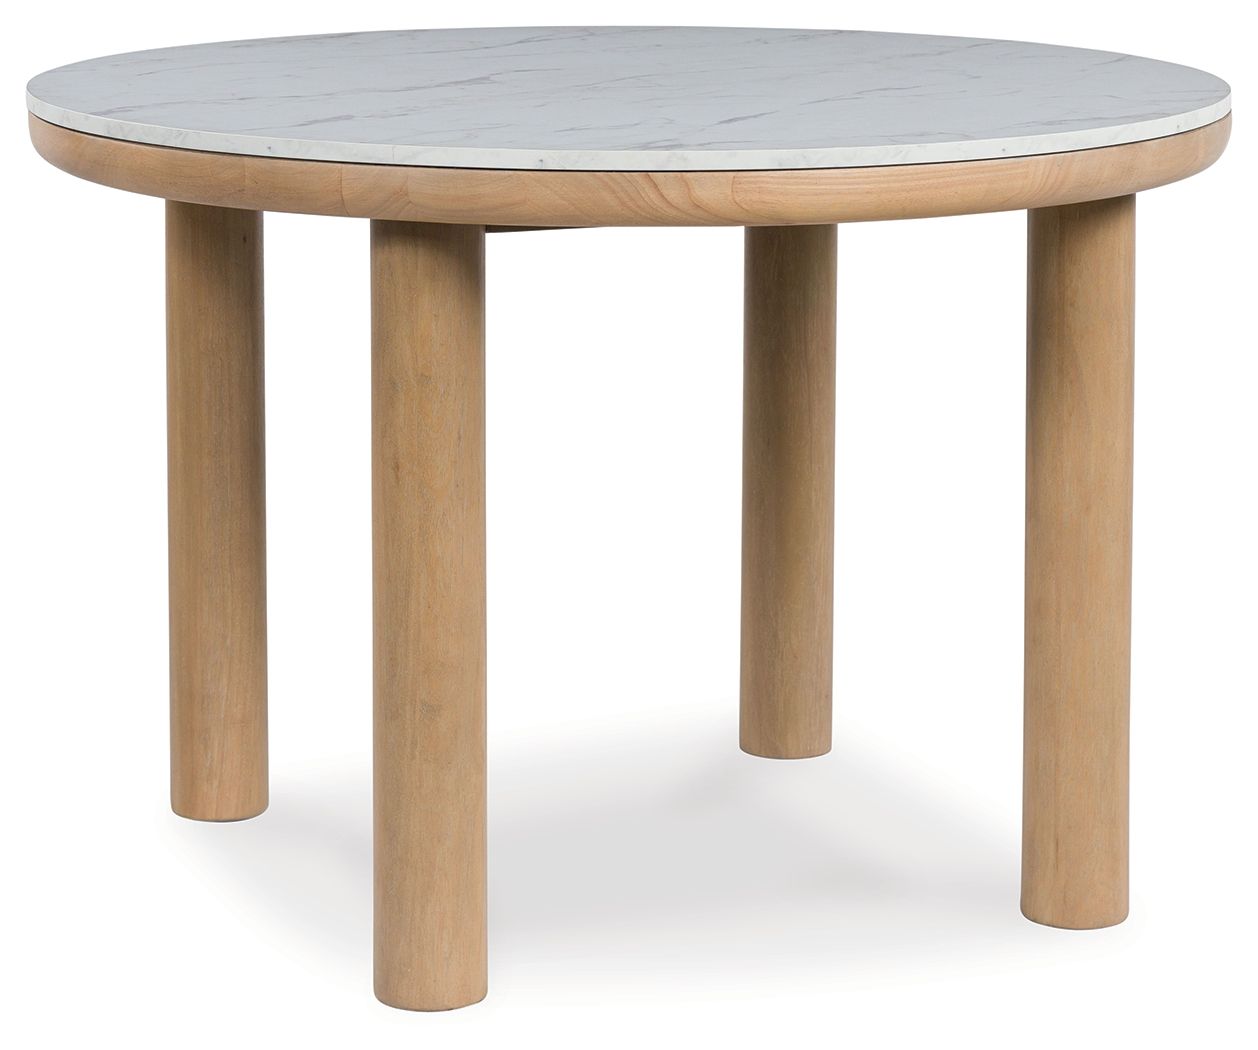 Sawdyn - Light Brown - Round Dining Room Table - Tony's Home Furnishings